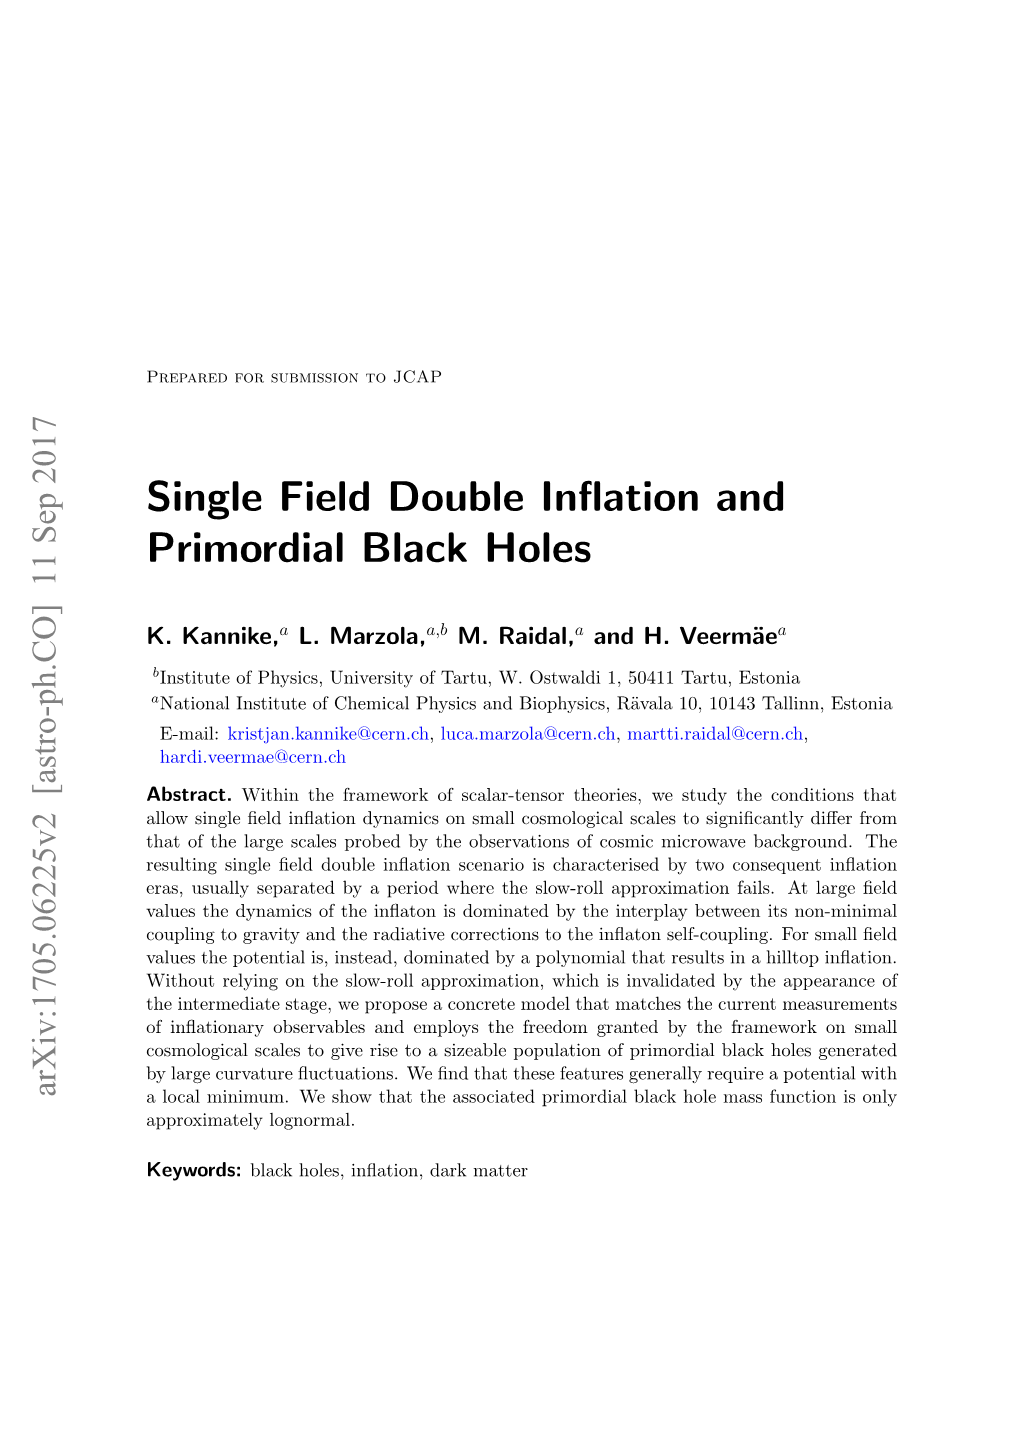 Single Field Double Inflation and Primordial Black Holes